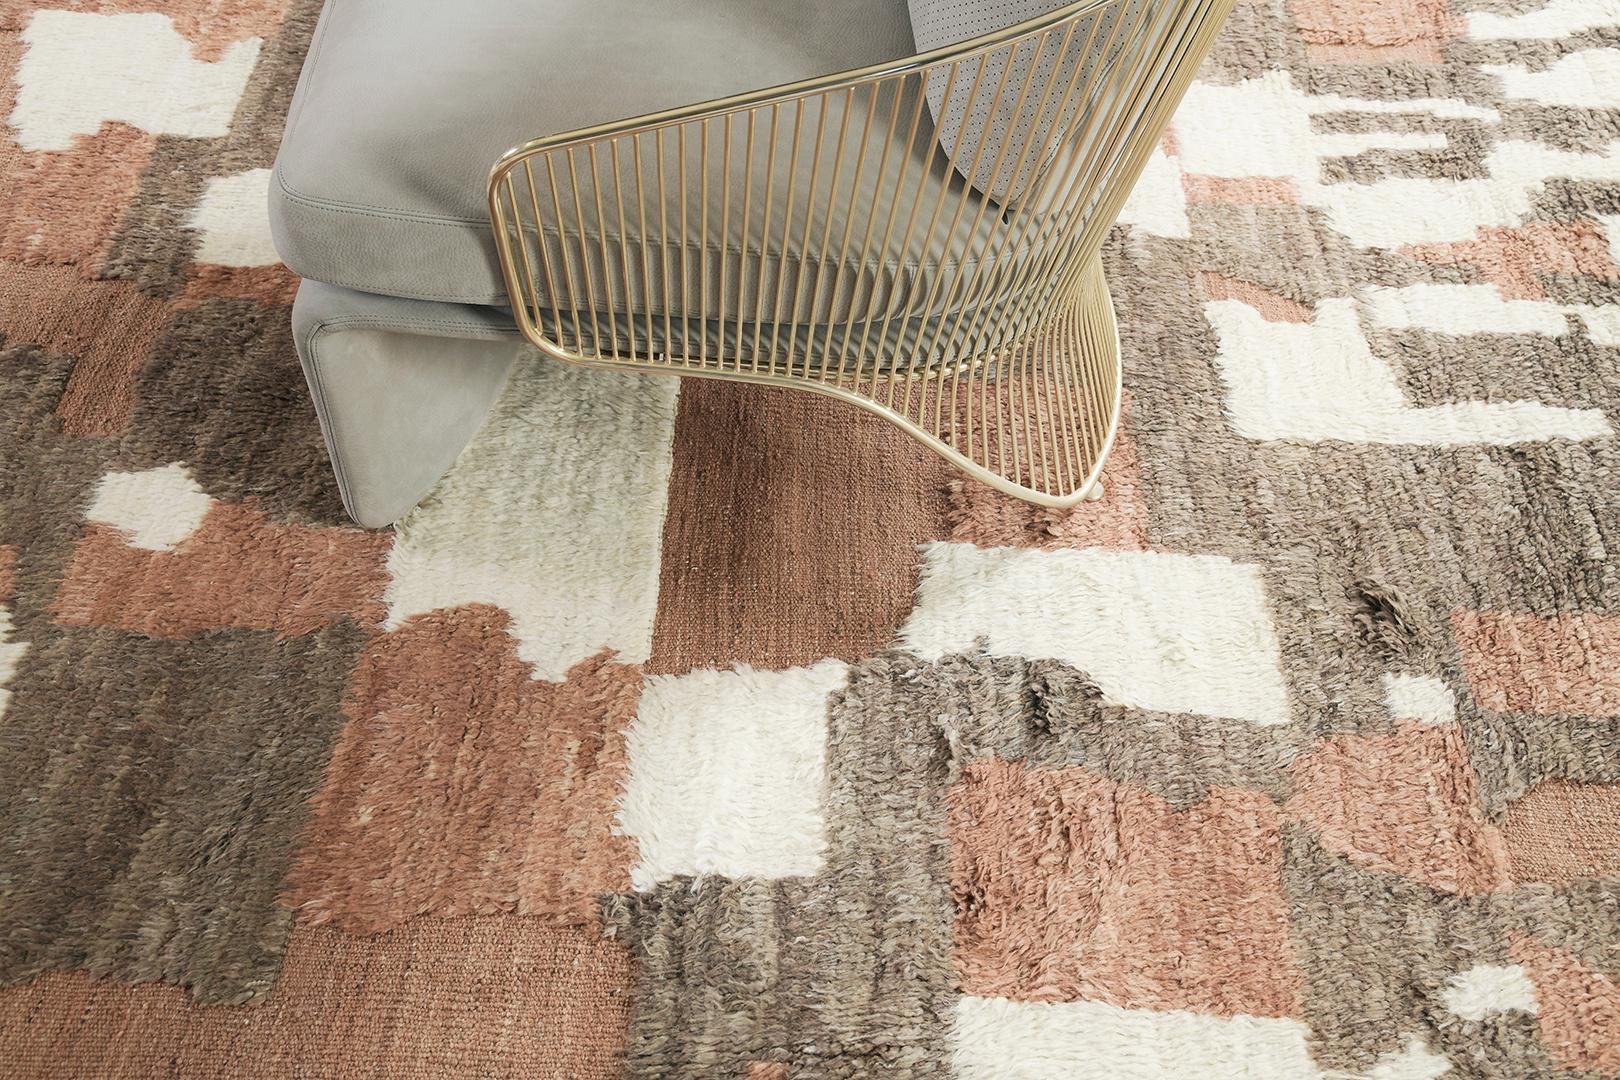 The Ussem rug is a pile woven wool piece inspired by Scandinavian design elements for the modern design world. The rug's shag balance and harmony, handwoven with playful shades of terracota toned flat weave with unique piles of ivory and umber